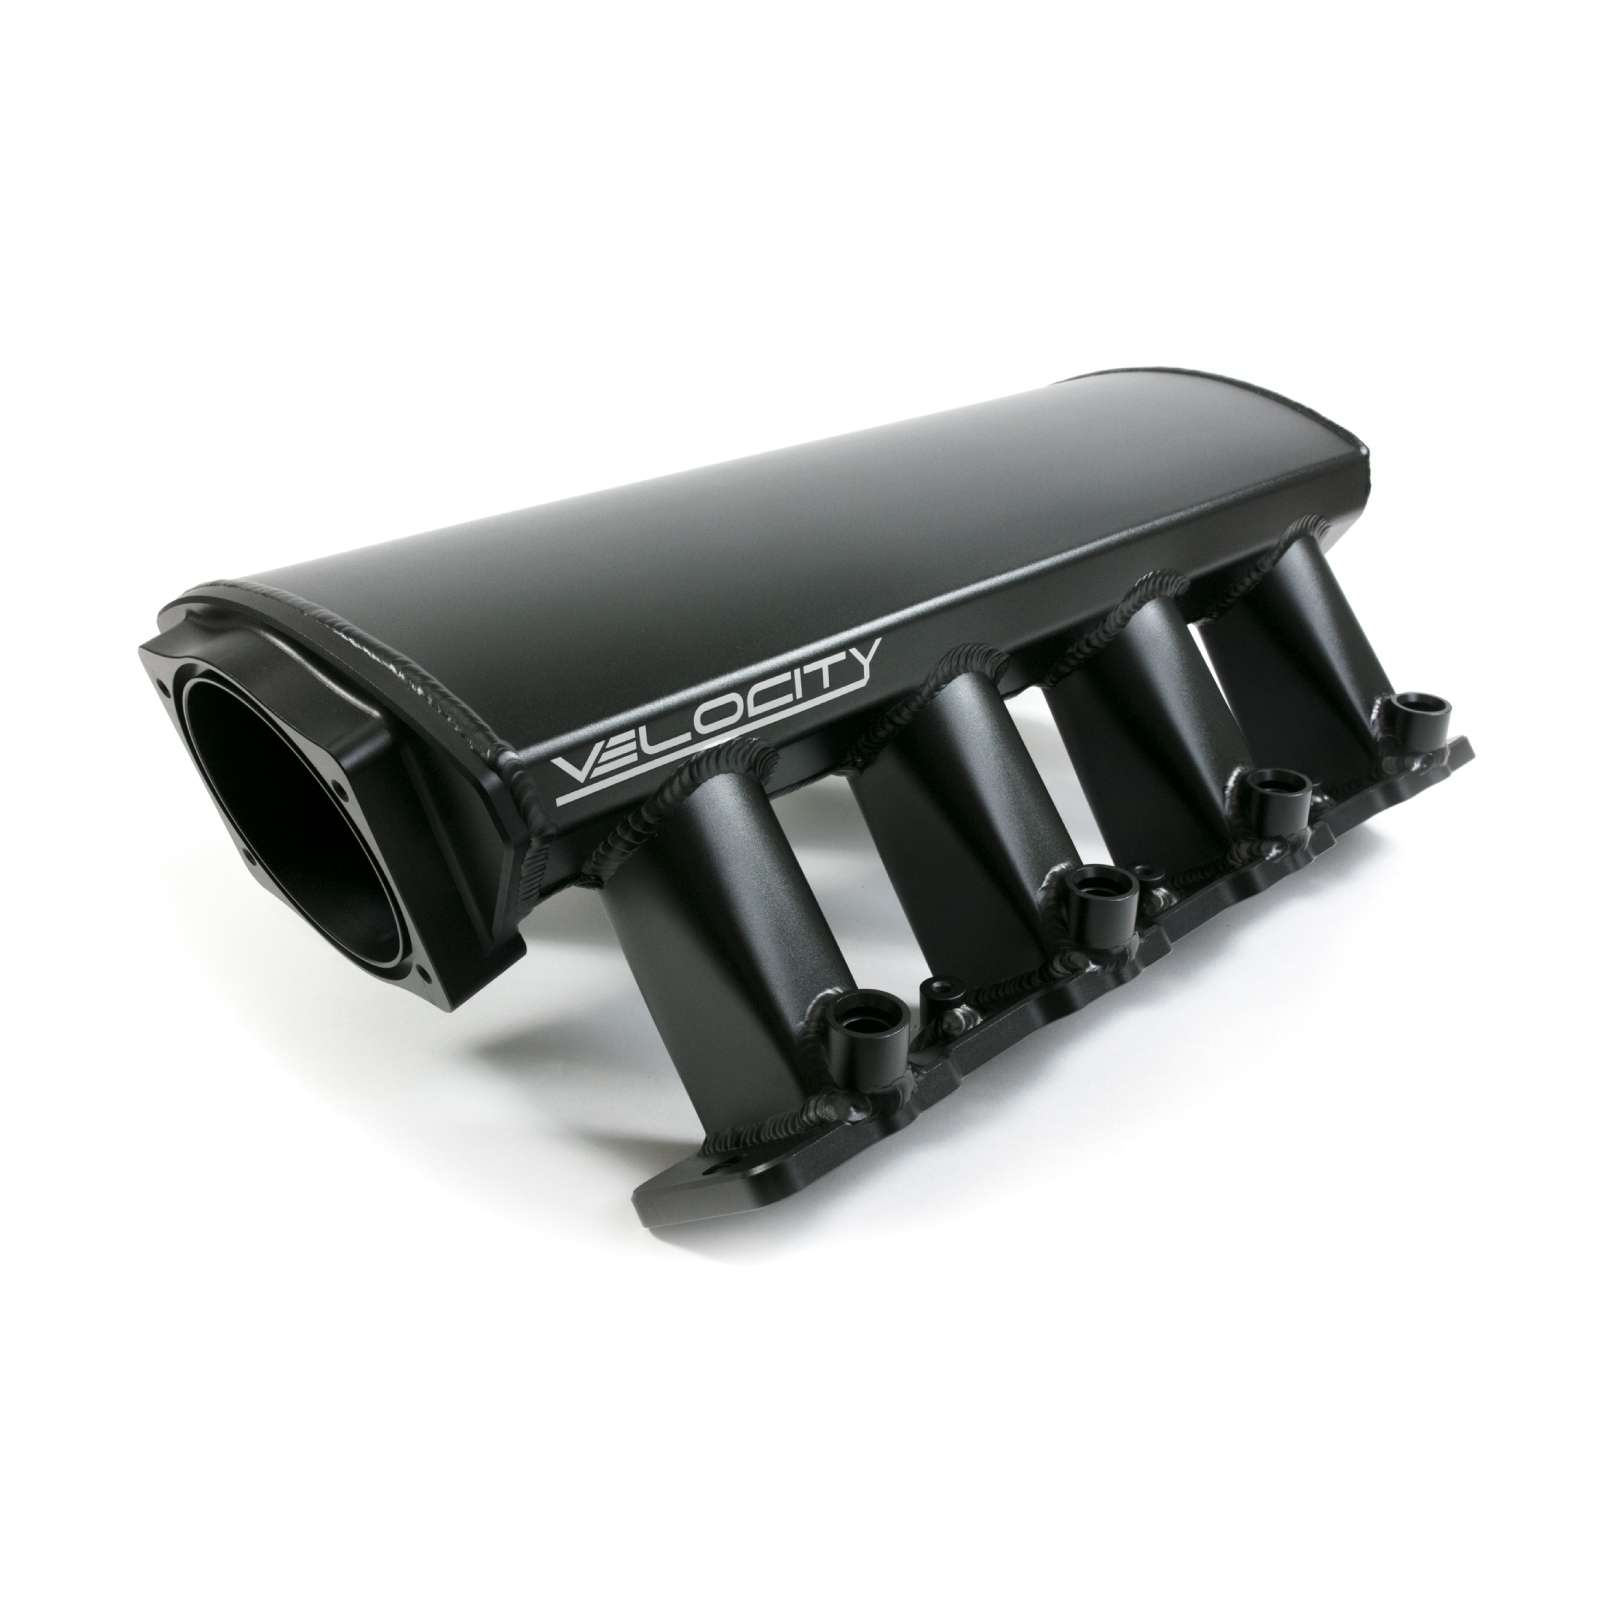 GM LS7 Raised Rectangle Port Angled Low Profile Clear Anodized TSP Velocity Fabricated Aluminum Intake Manifold